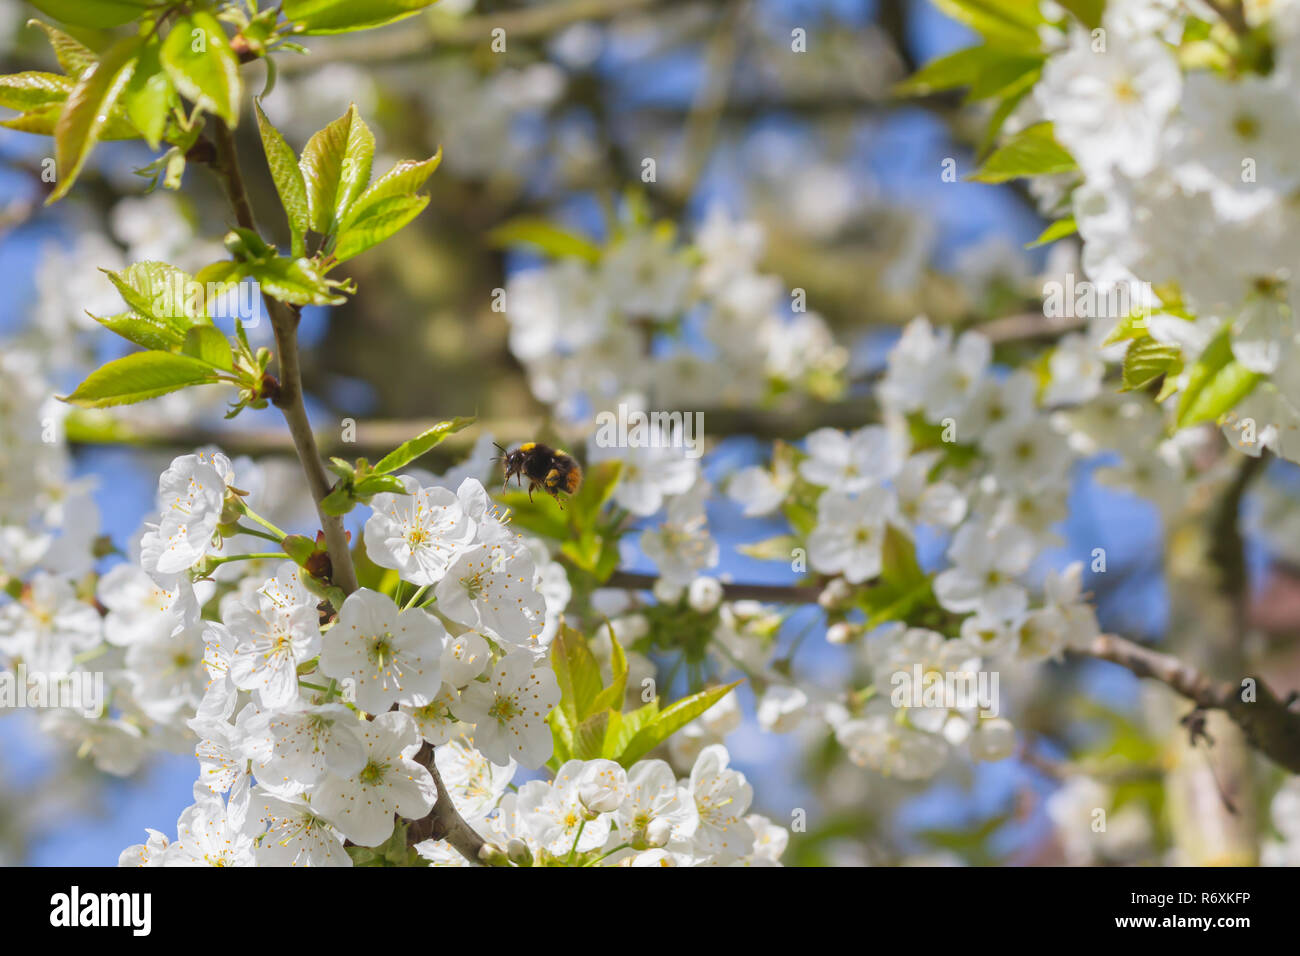 Bumblebee and cherry blossoms Stock Photo